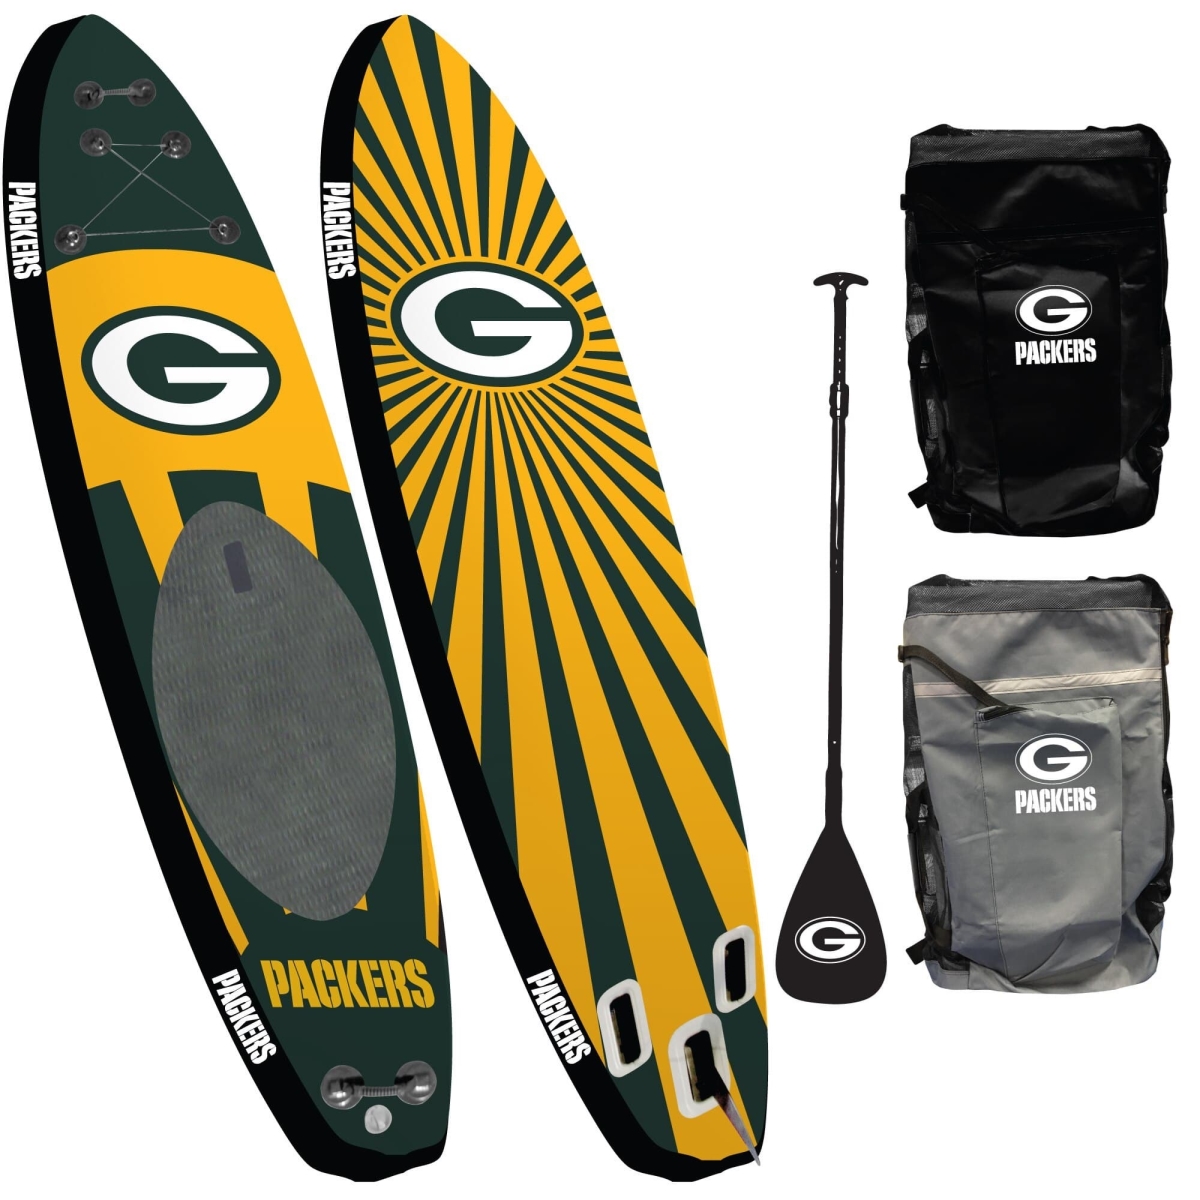 BCPDLBGRB Team Pride NFL Green Bay Packers Inflatable Stand Up Paddle Board -  SPORTICULTURE